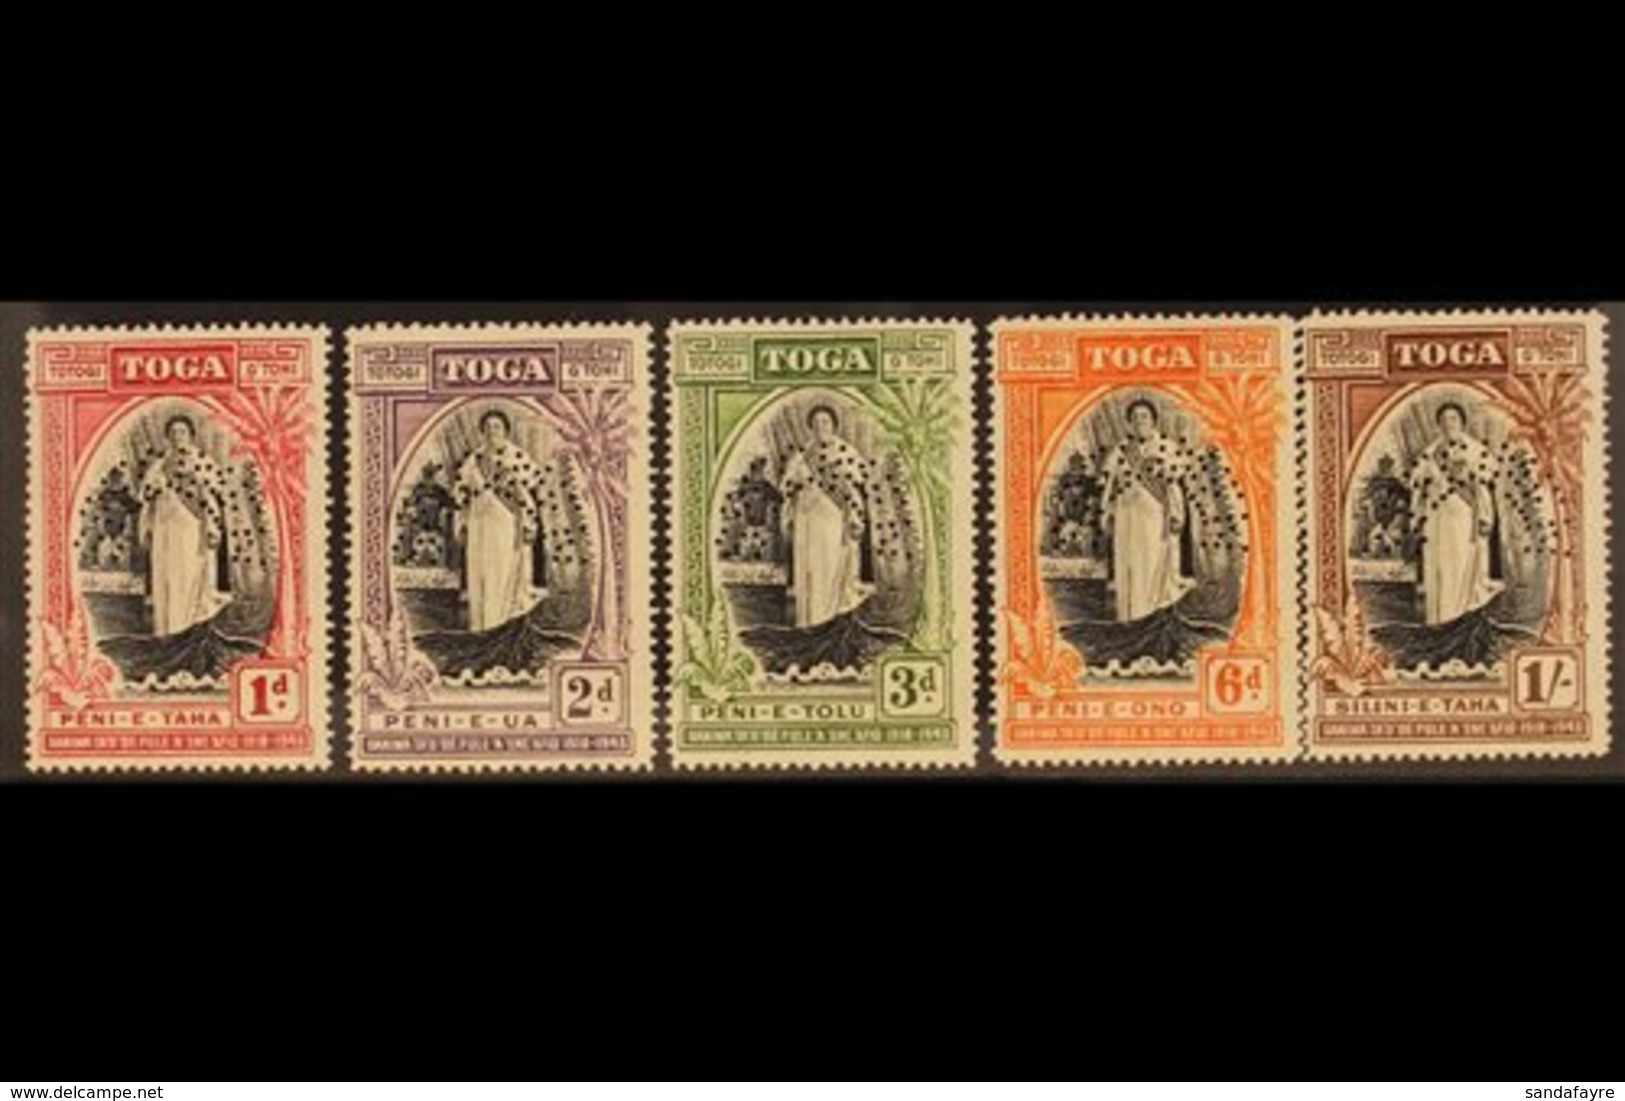 1944 SPECIMEN SET. The Complete Silver Jubilee Set, Perf. "SPECIMEN", SG 83s/87s, Very Fine Mint. (5 Stamps) For More Im - Tonga (...-1970)